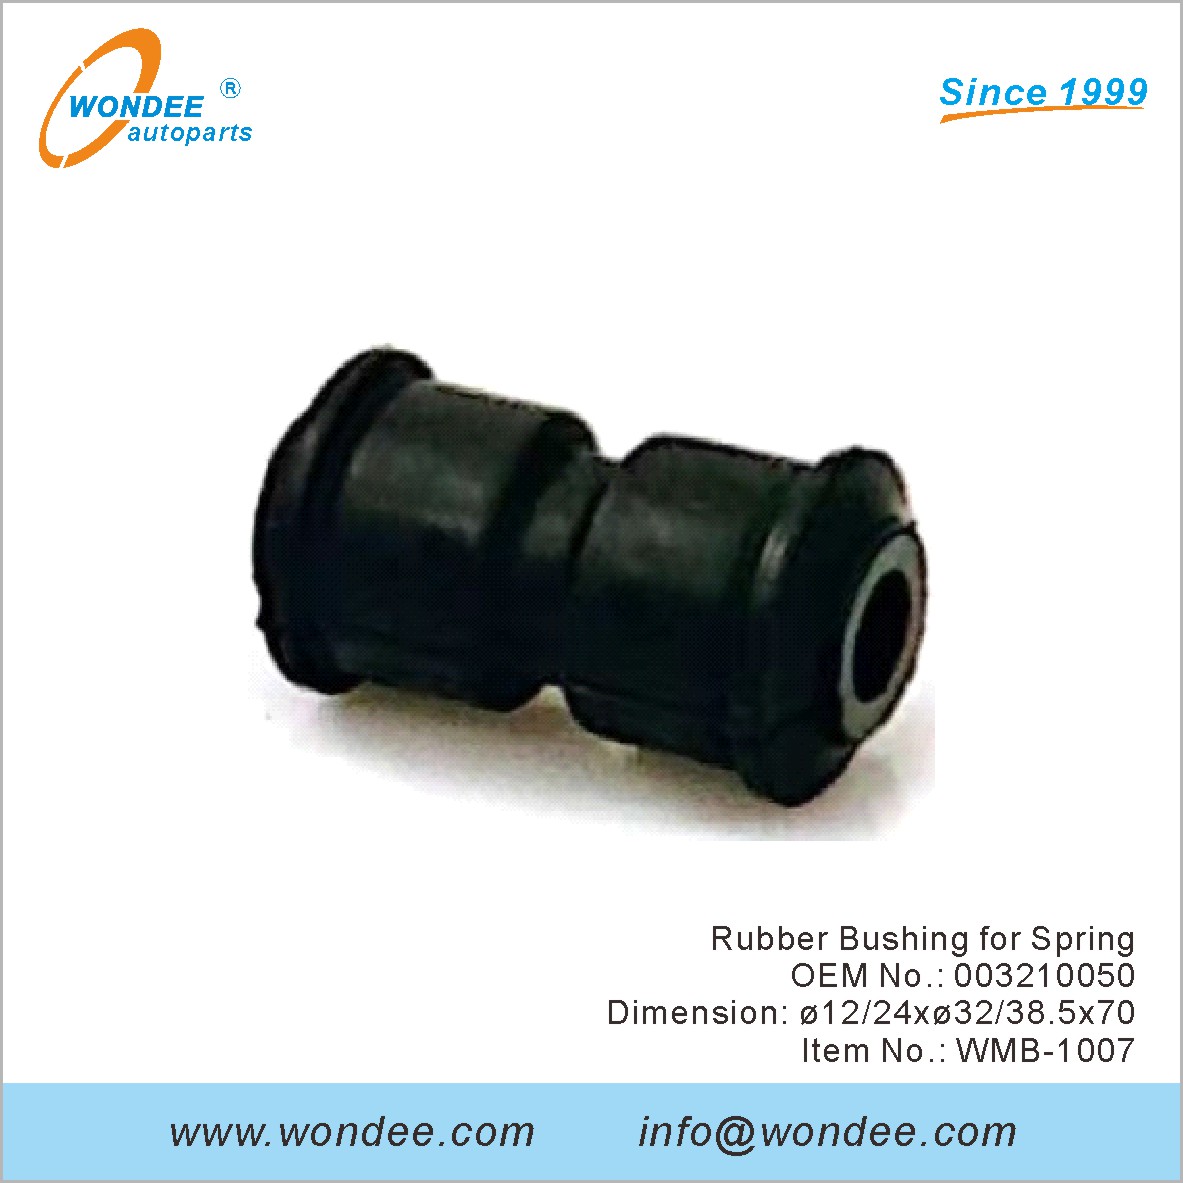 Rubber Bushing for Spring OEM 003210050 for Benz from WONDEE